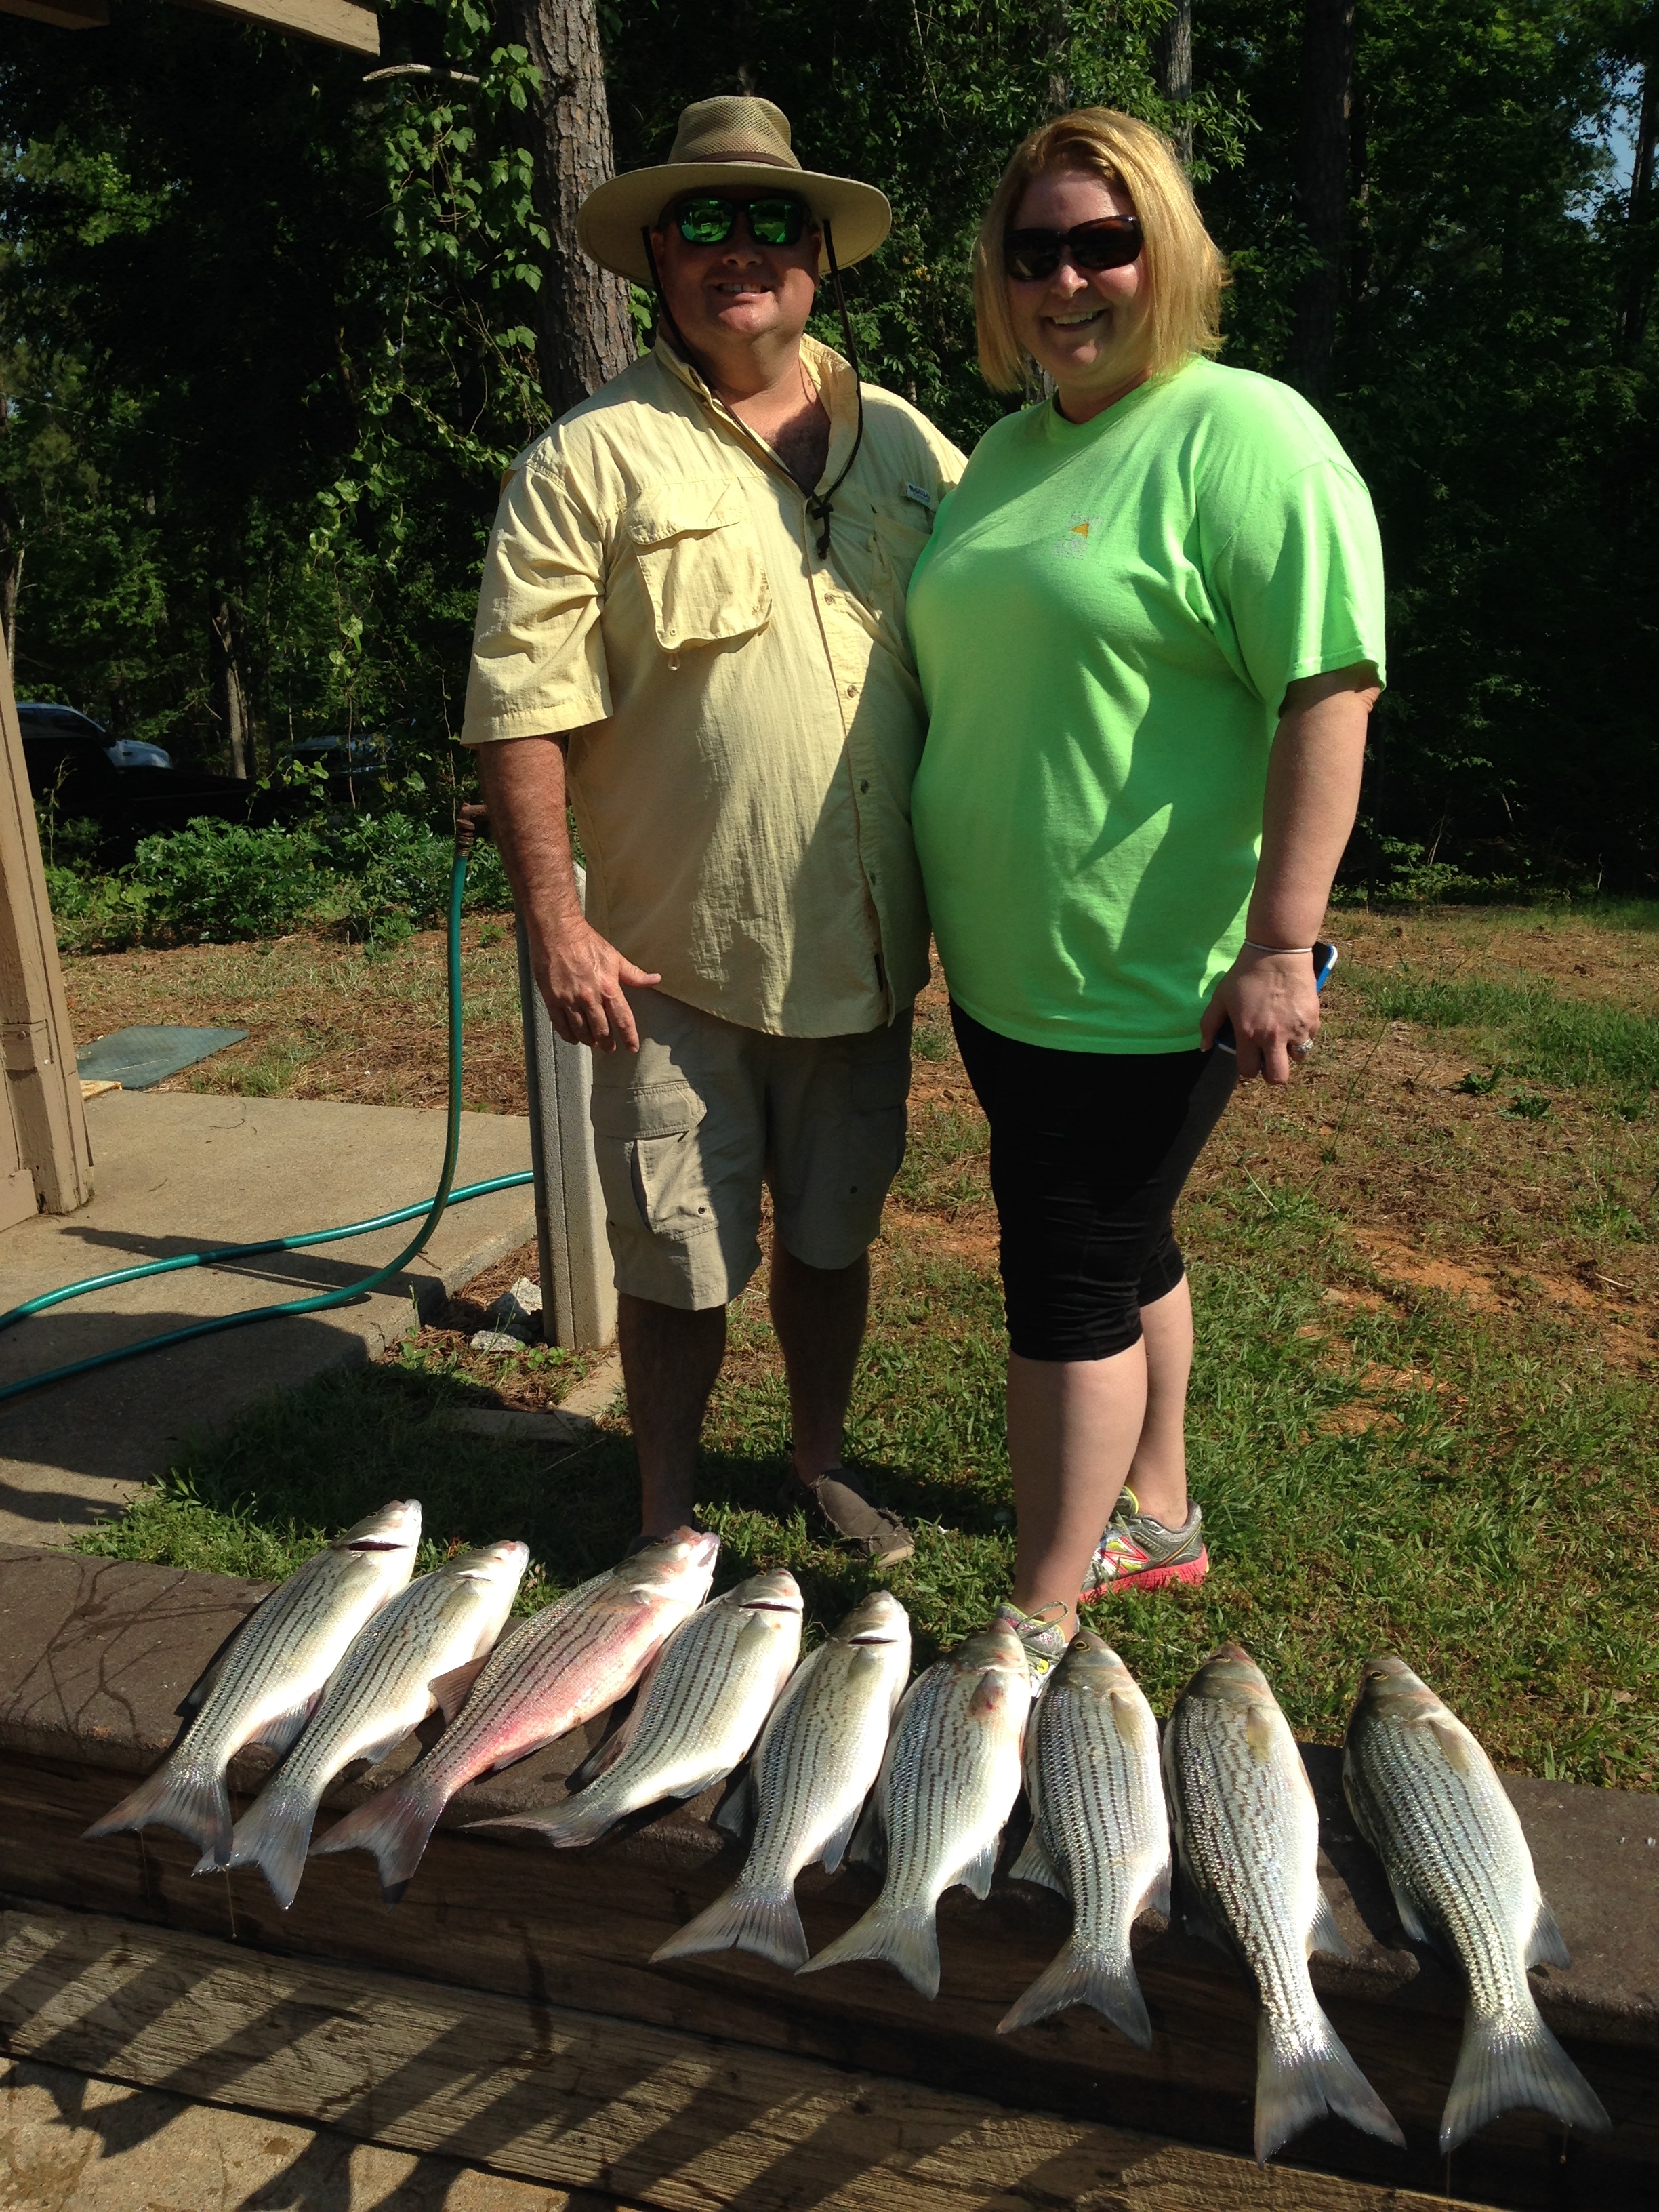 May 12, 2018 Jim and Loren with their nice catch.